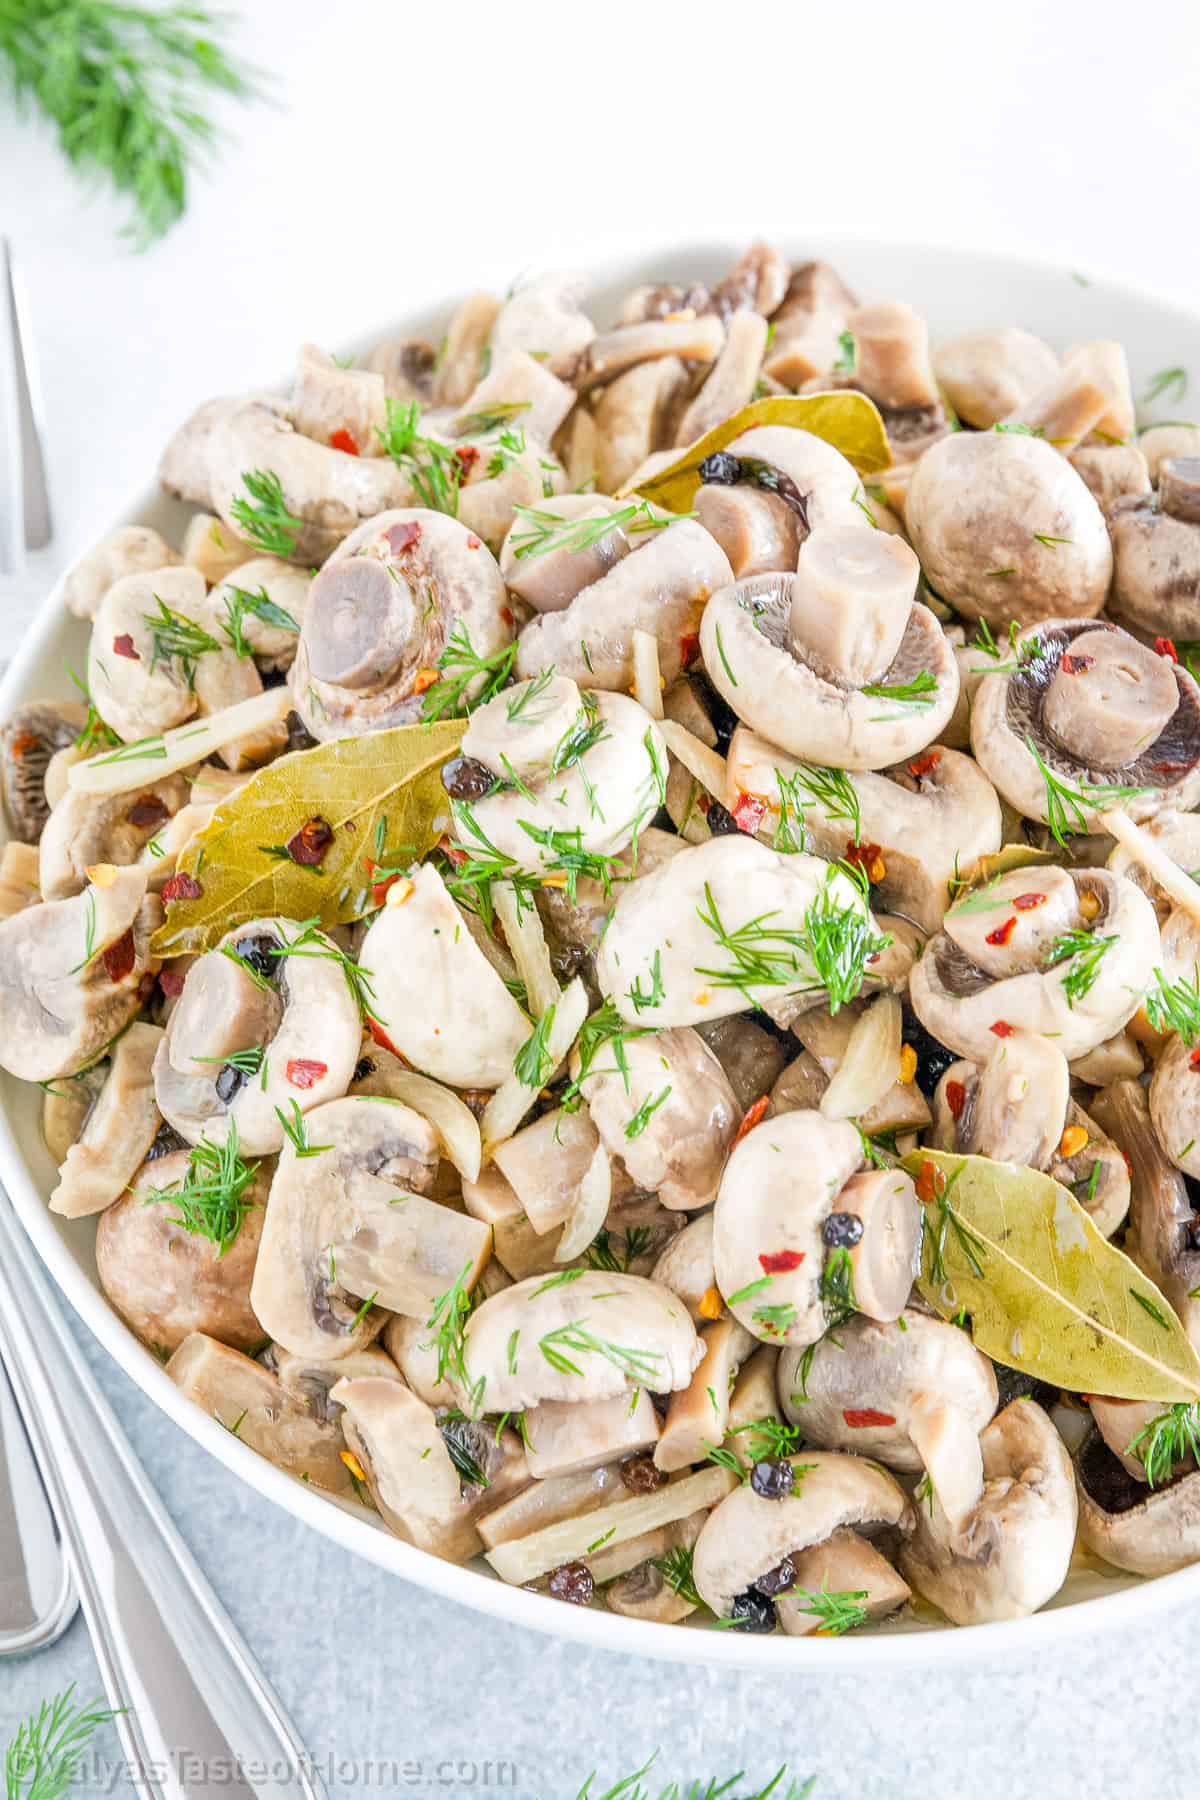 Marinated mushrooms are a delicious and versatile delicacy that can be used in a variety of dishes or enjoyed on their own.